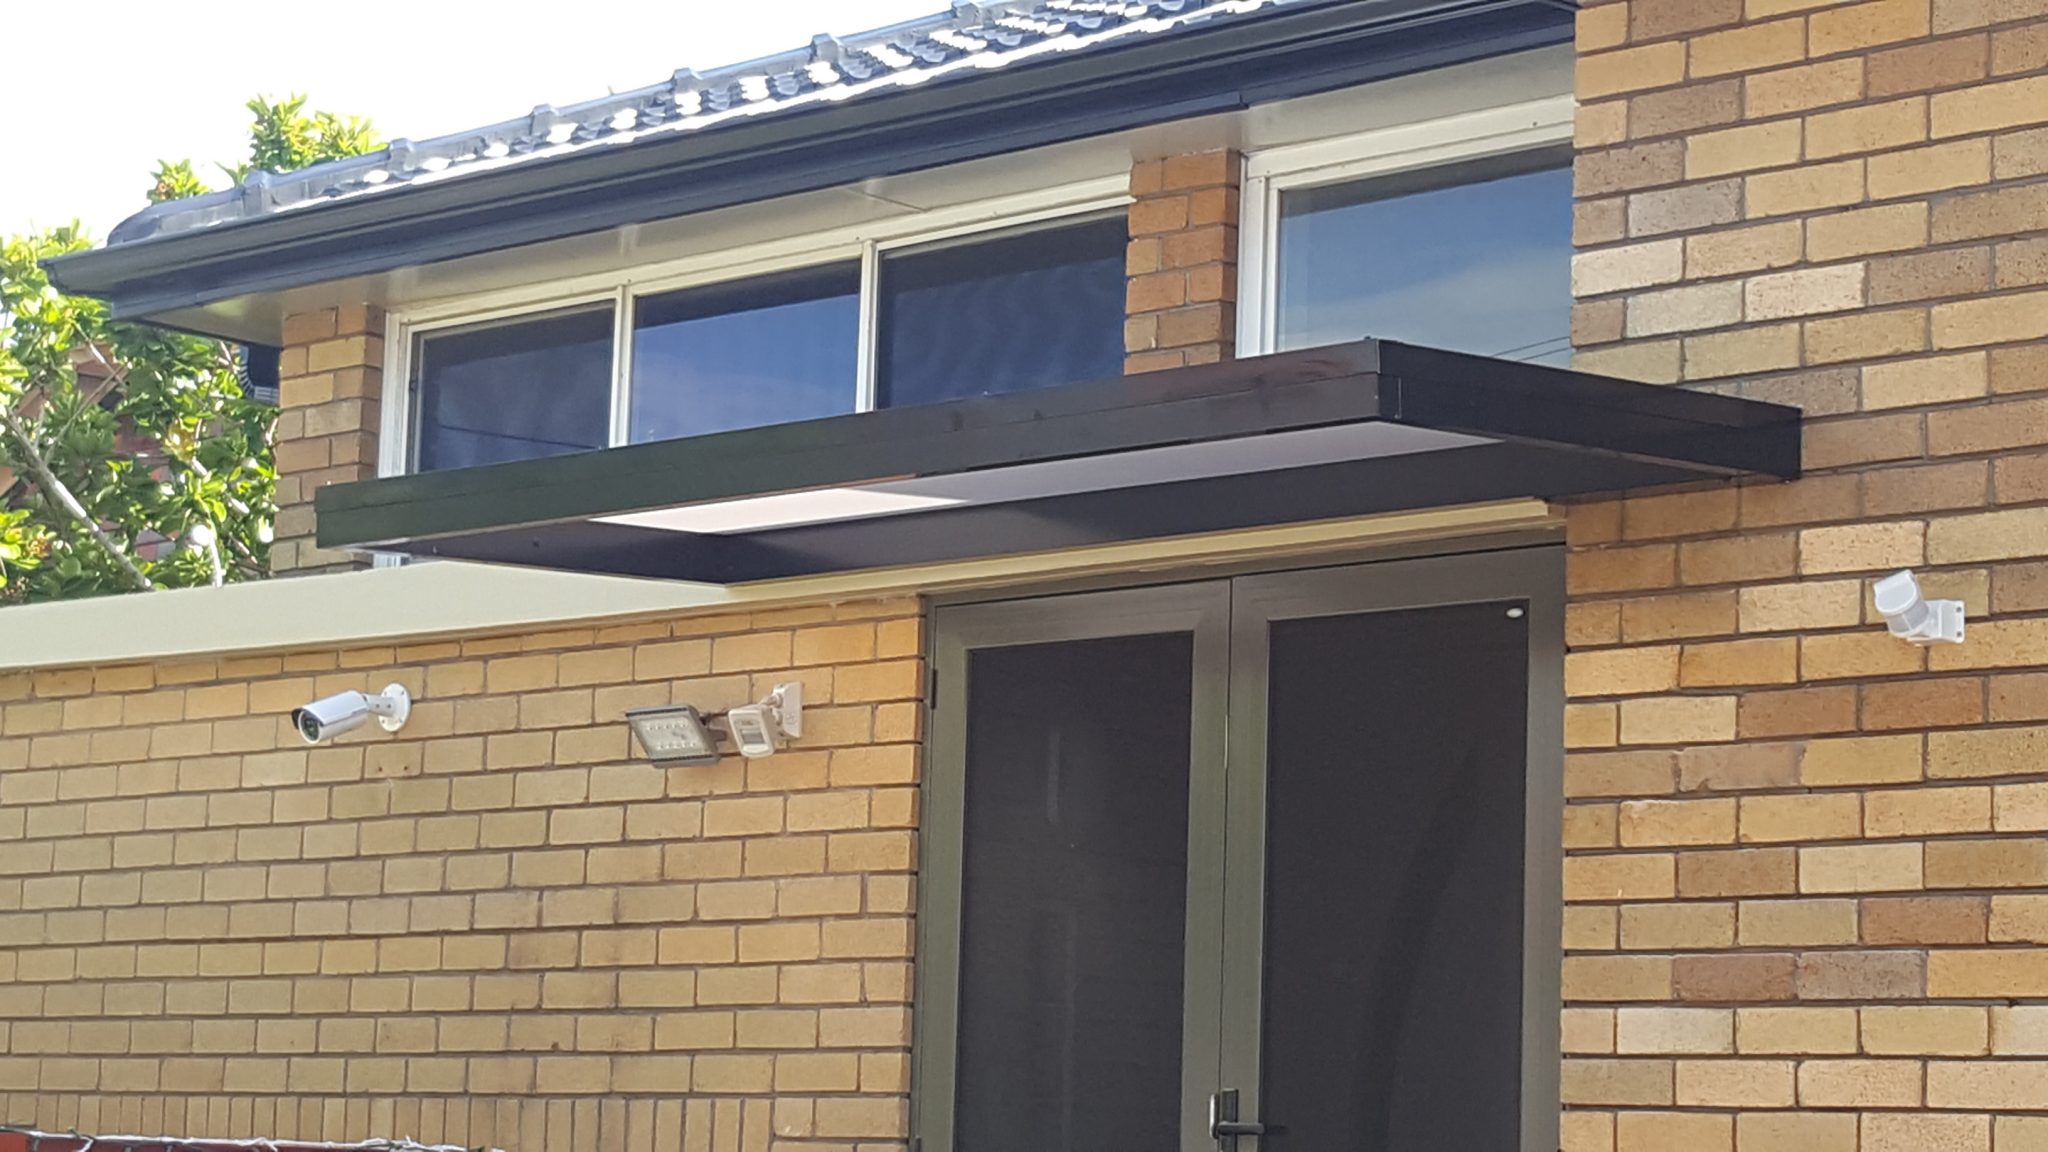 Slimline Awnings Over Rear Door Eco Awnings